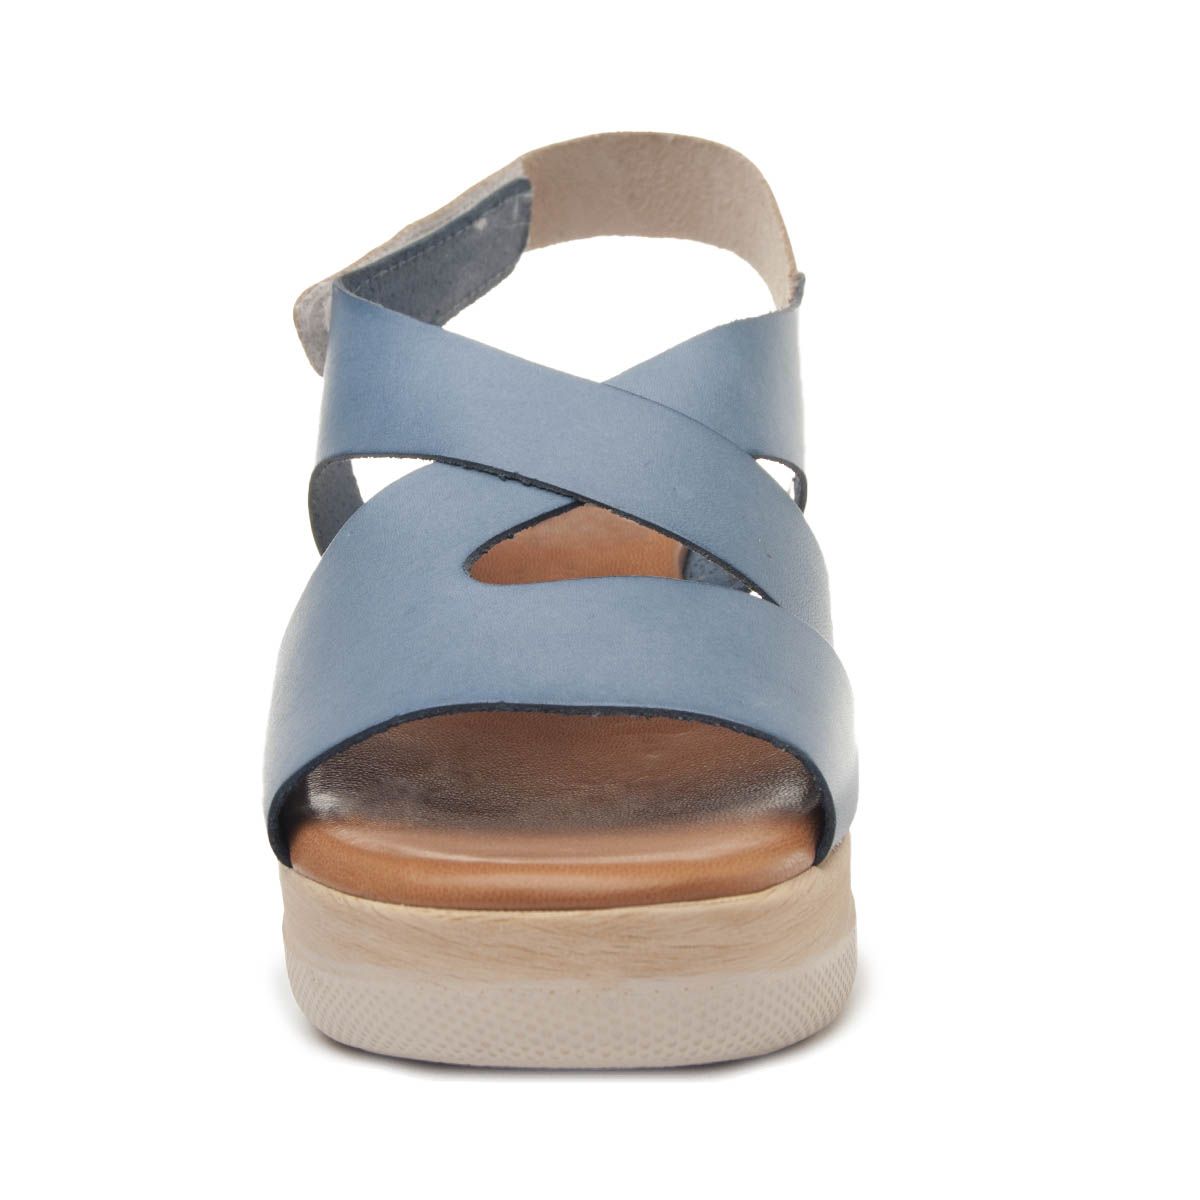 These new sandals meet everything you need to make your summer perfect. Perfect combination between quality, community and design. Manufactured 100% in leather, with padded plant also made of skin and non-slip and light polyurethane sole, nothing weigh. Its combinations of colors and textures make these sandals unique pieces very top and easy to combine. Natural skin, ergonomic, flexible, footprint effect, soft, absorbent, breathable, shock Absorbing, lightweight and anti-slip..Description Technical: External materialNeatural Leatherial Interior: Natural Leather.Material Plant: Natural Leather.Material Sole: Polyurethane. . East Platform: 3,5.Tight Heel: 0.Ture Bag0.Proofundity Bag